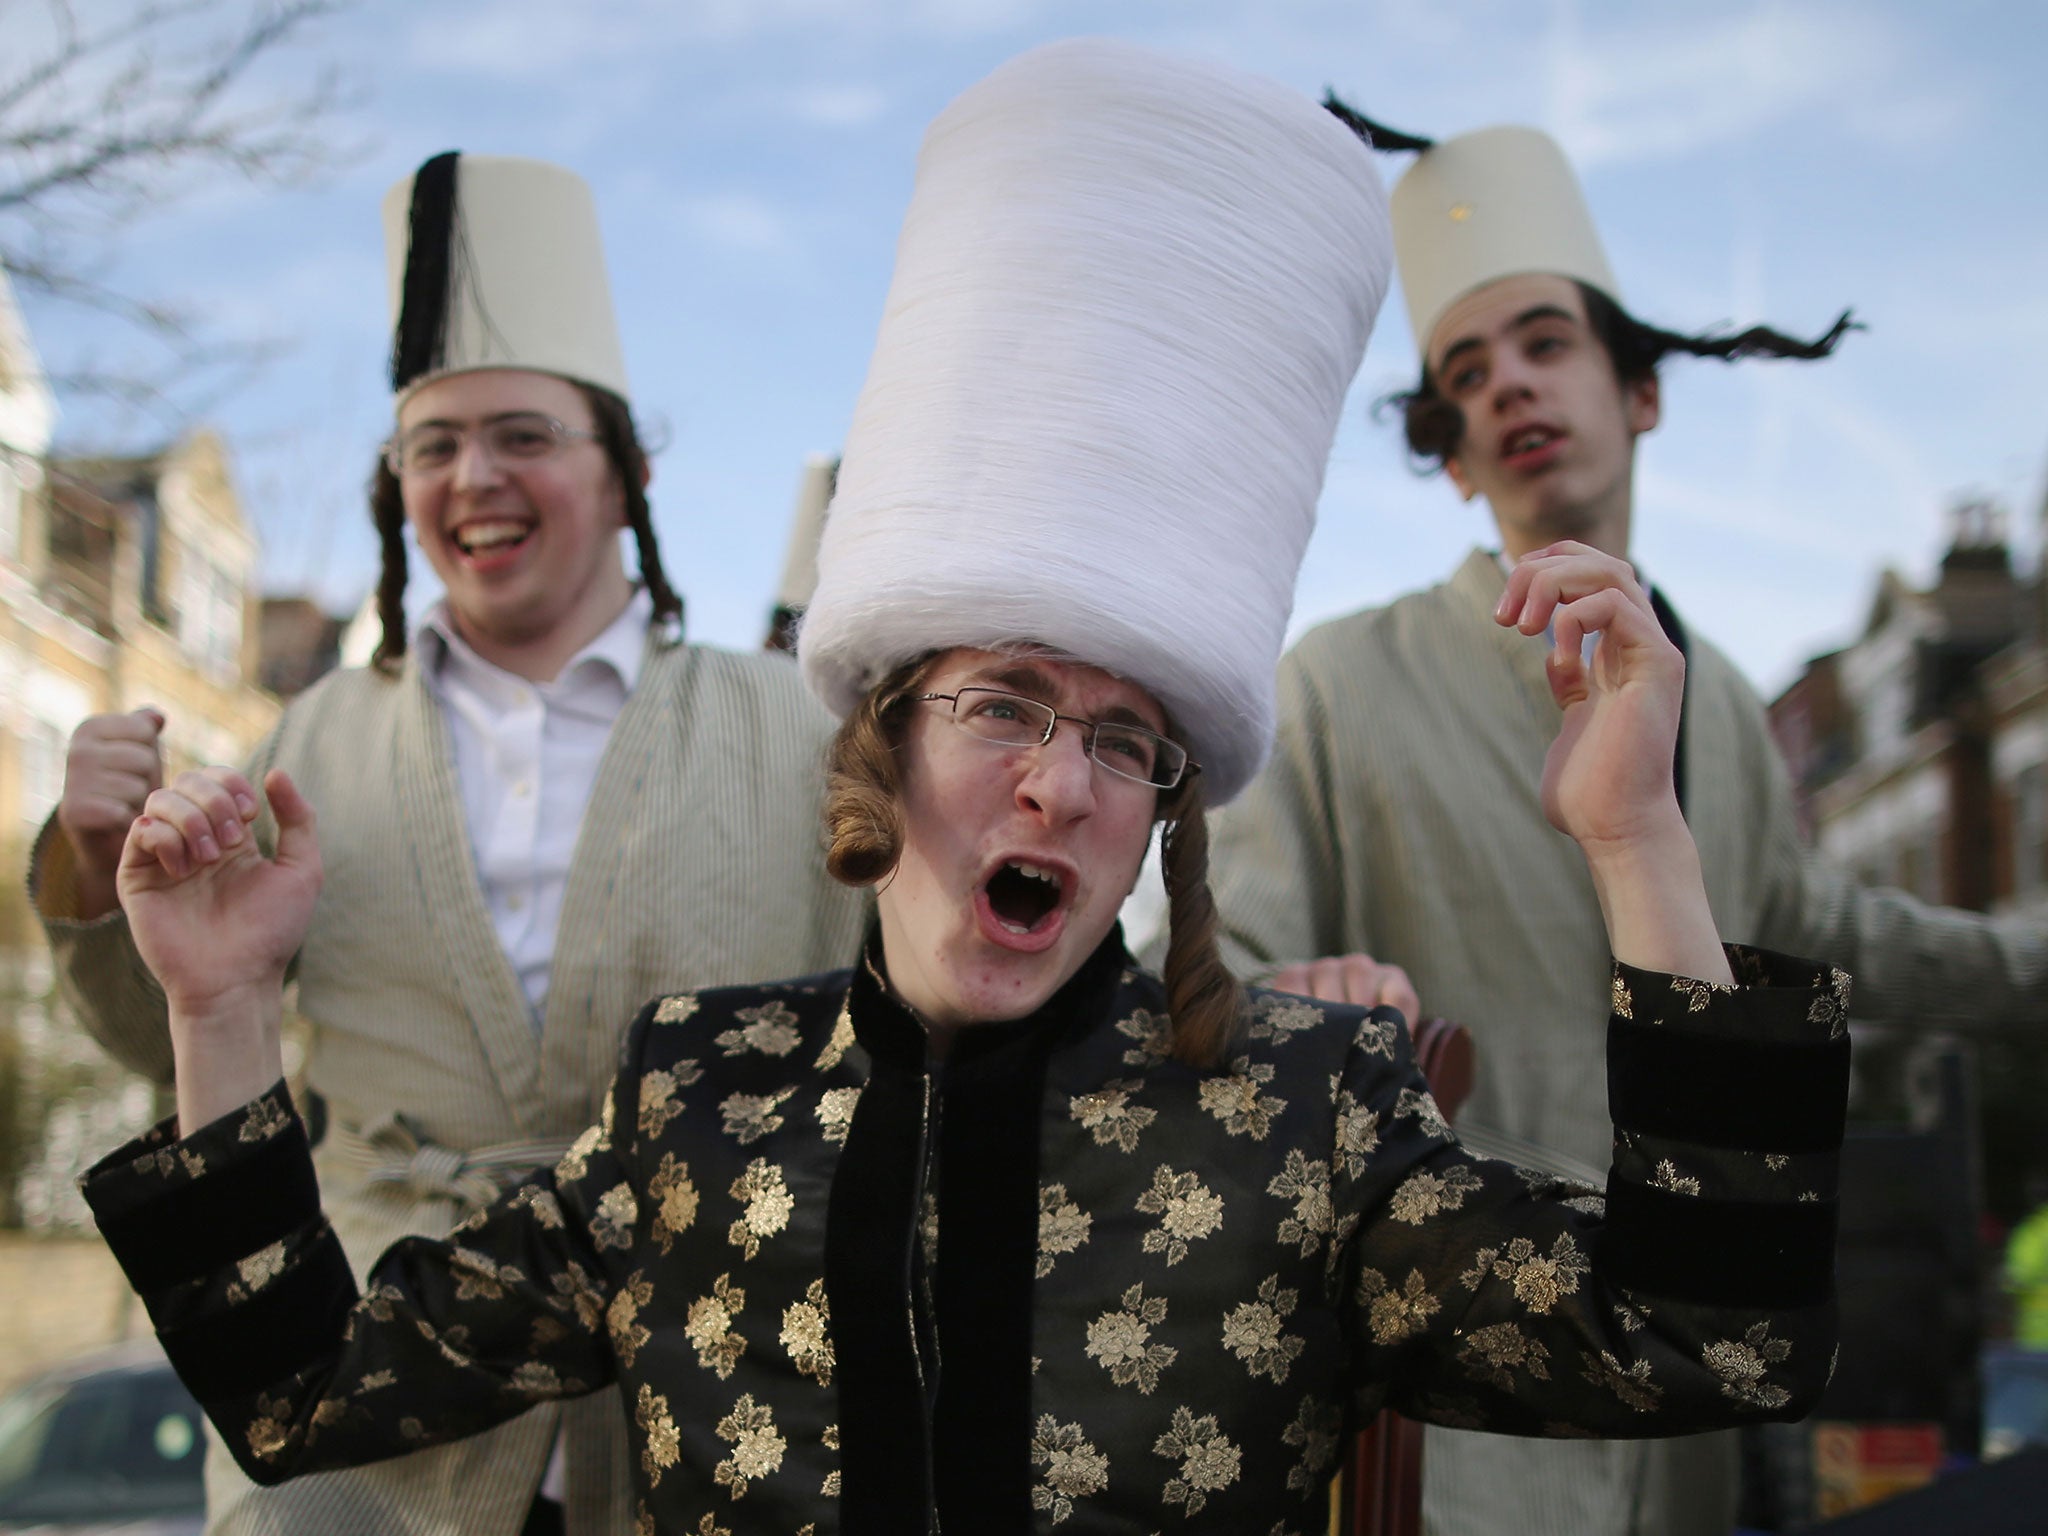 A group of Orthodox Jewish boys dance and sing outside the home of a local businessmen while collecting money for their school during the Jewish holiday of Purim on March 5, 2015 in London, England.